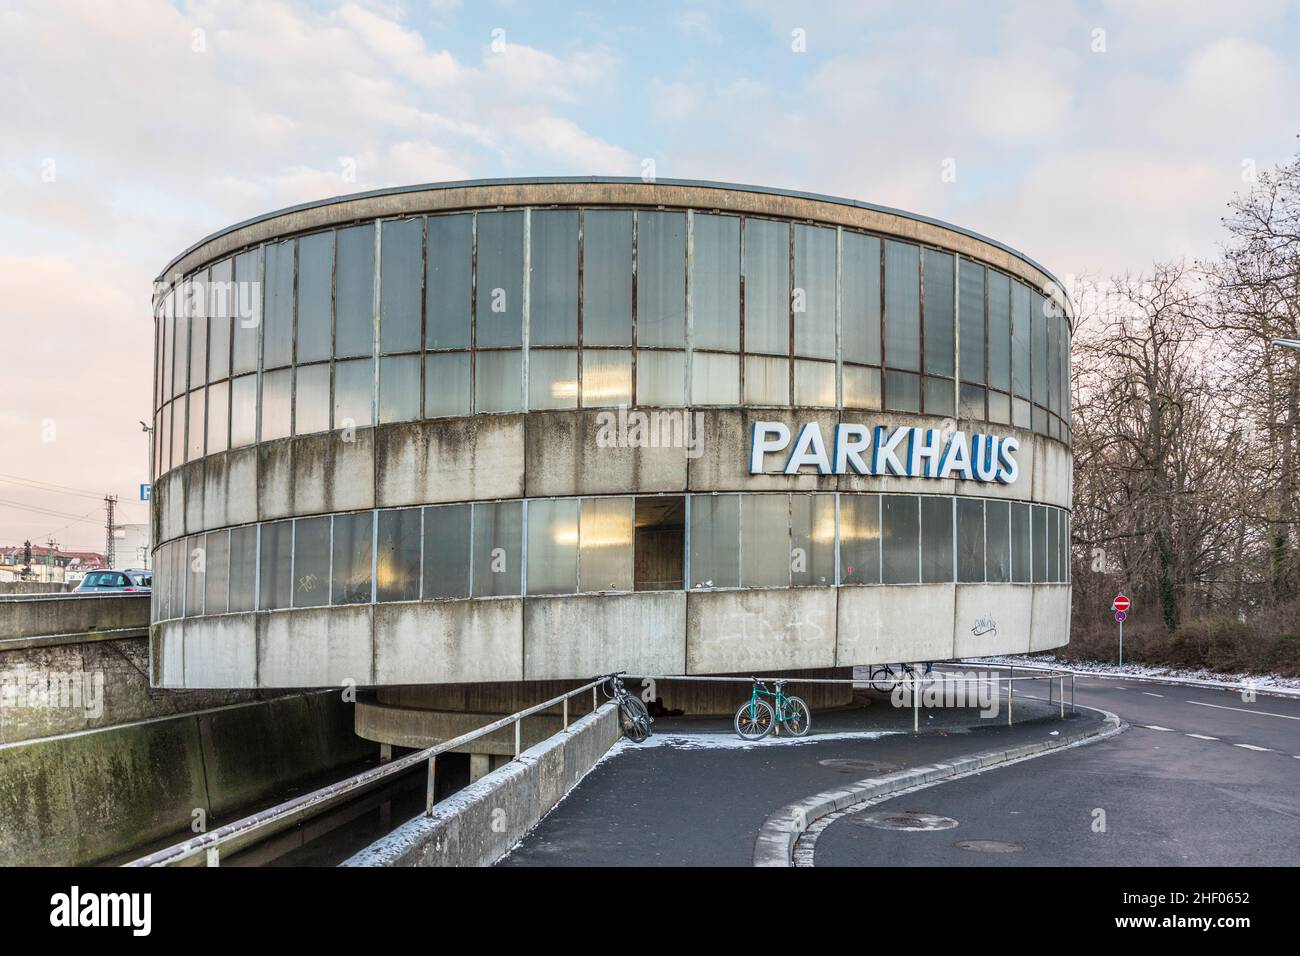 WUERZBURG, GERMANY - JAN 16, 2017: old parkhaus in the style of 1960 architecture under cloudy sky Stock Photo